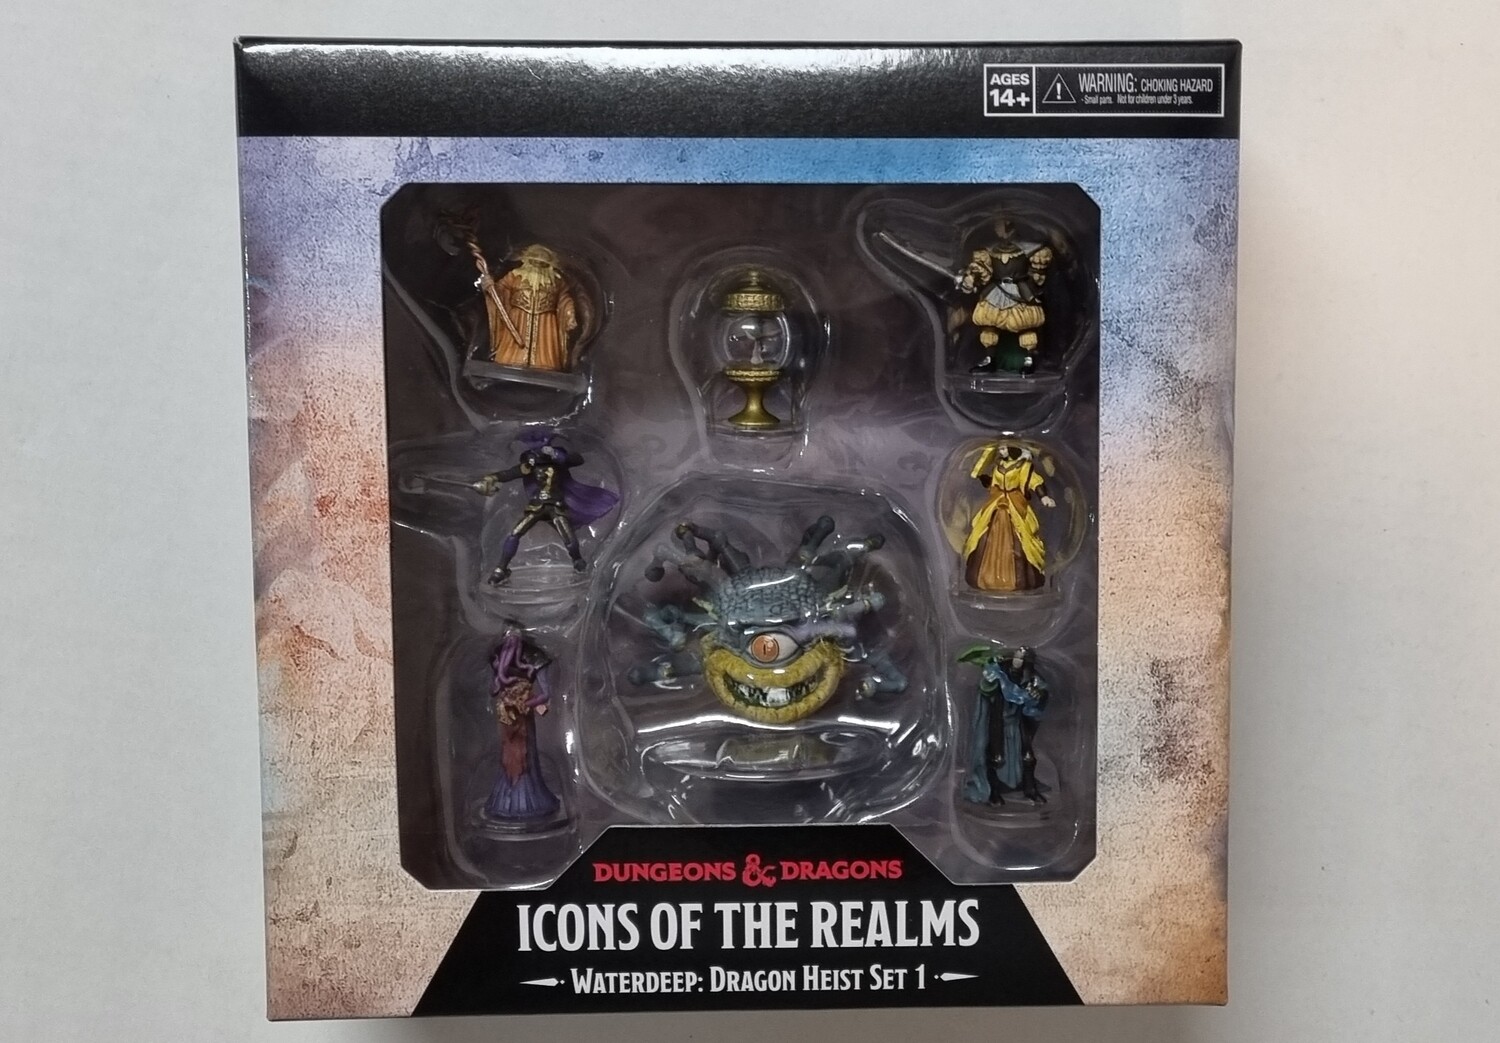 Miniatures Pre-Painted, Waterdeep  Dragon Heist Box Set 1, D&D, Icons of the Realms, Dungeons & Dragons 